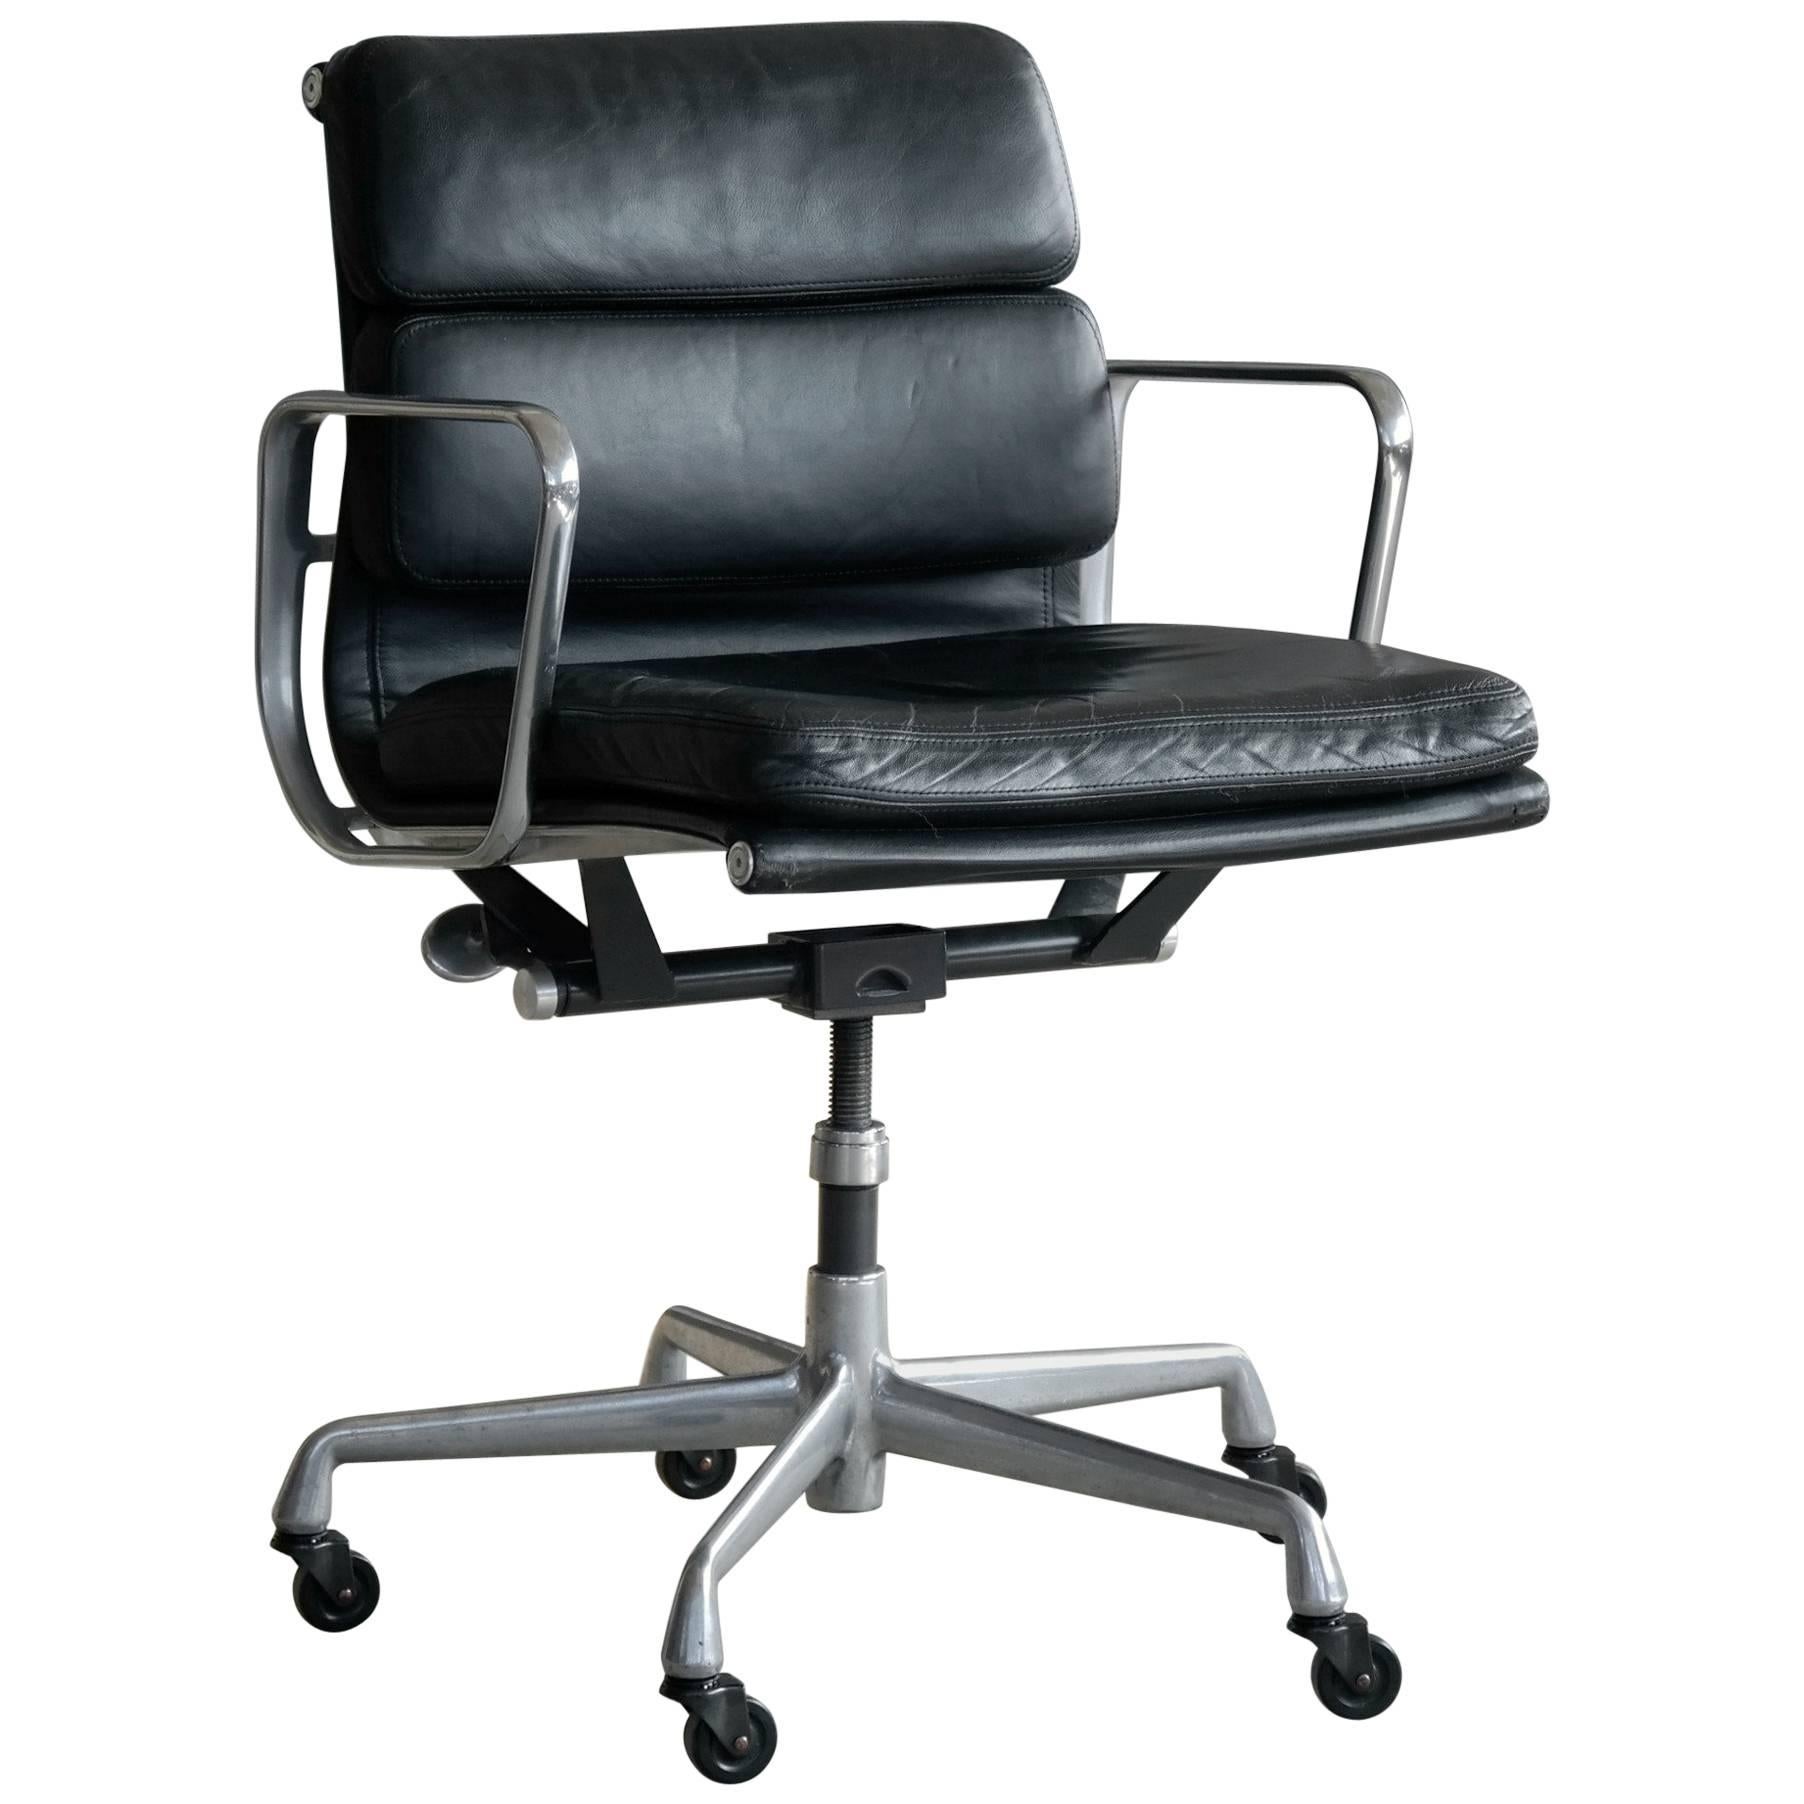 Eames Soft Pad Management Chair Model Ea434 European Issue with Caster Wheels